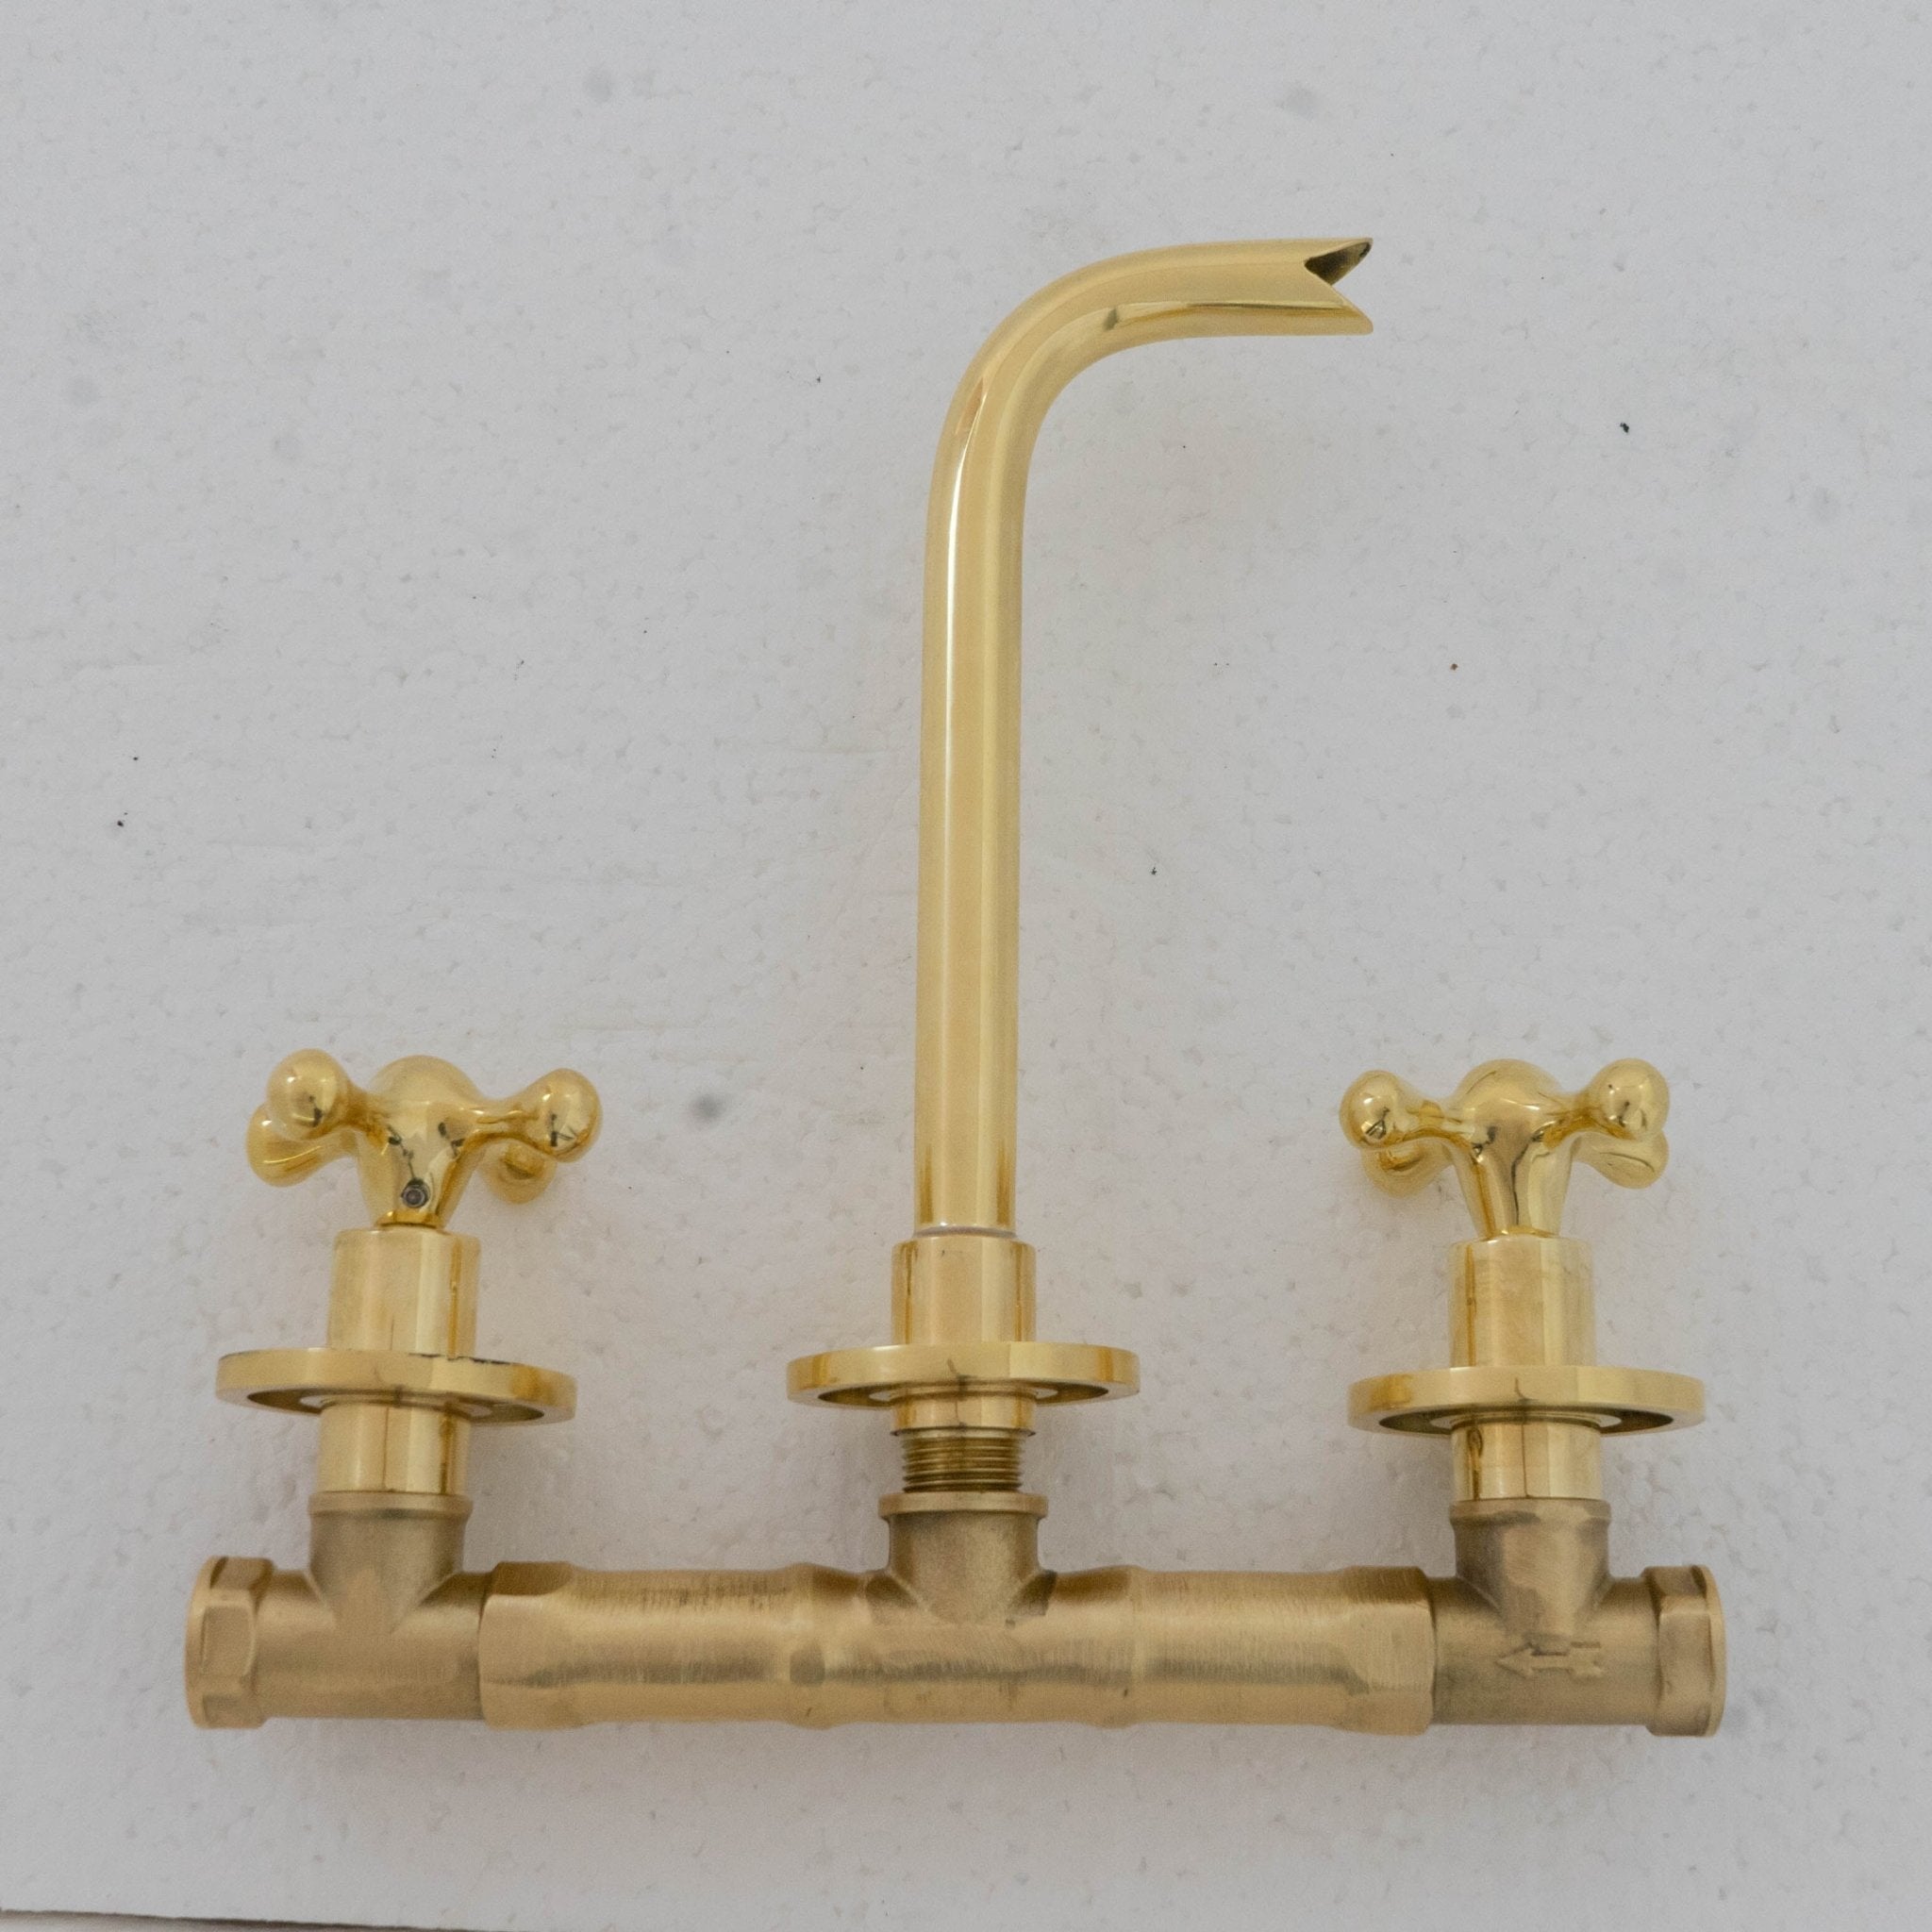 Unlacquered Brass Bathroom Faucet - Antique Brass Wall Mount Faucet ISW01